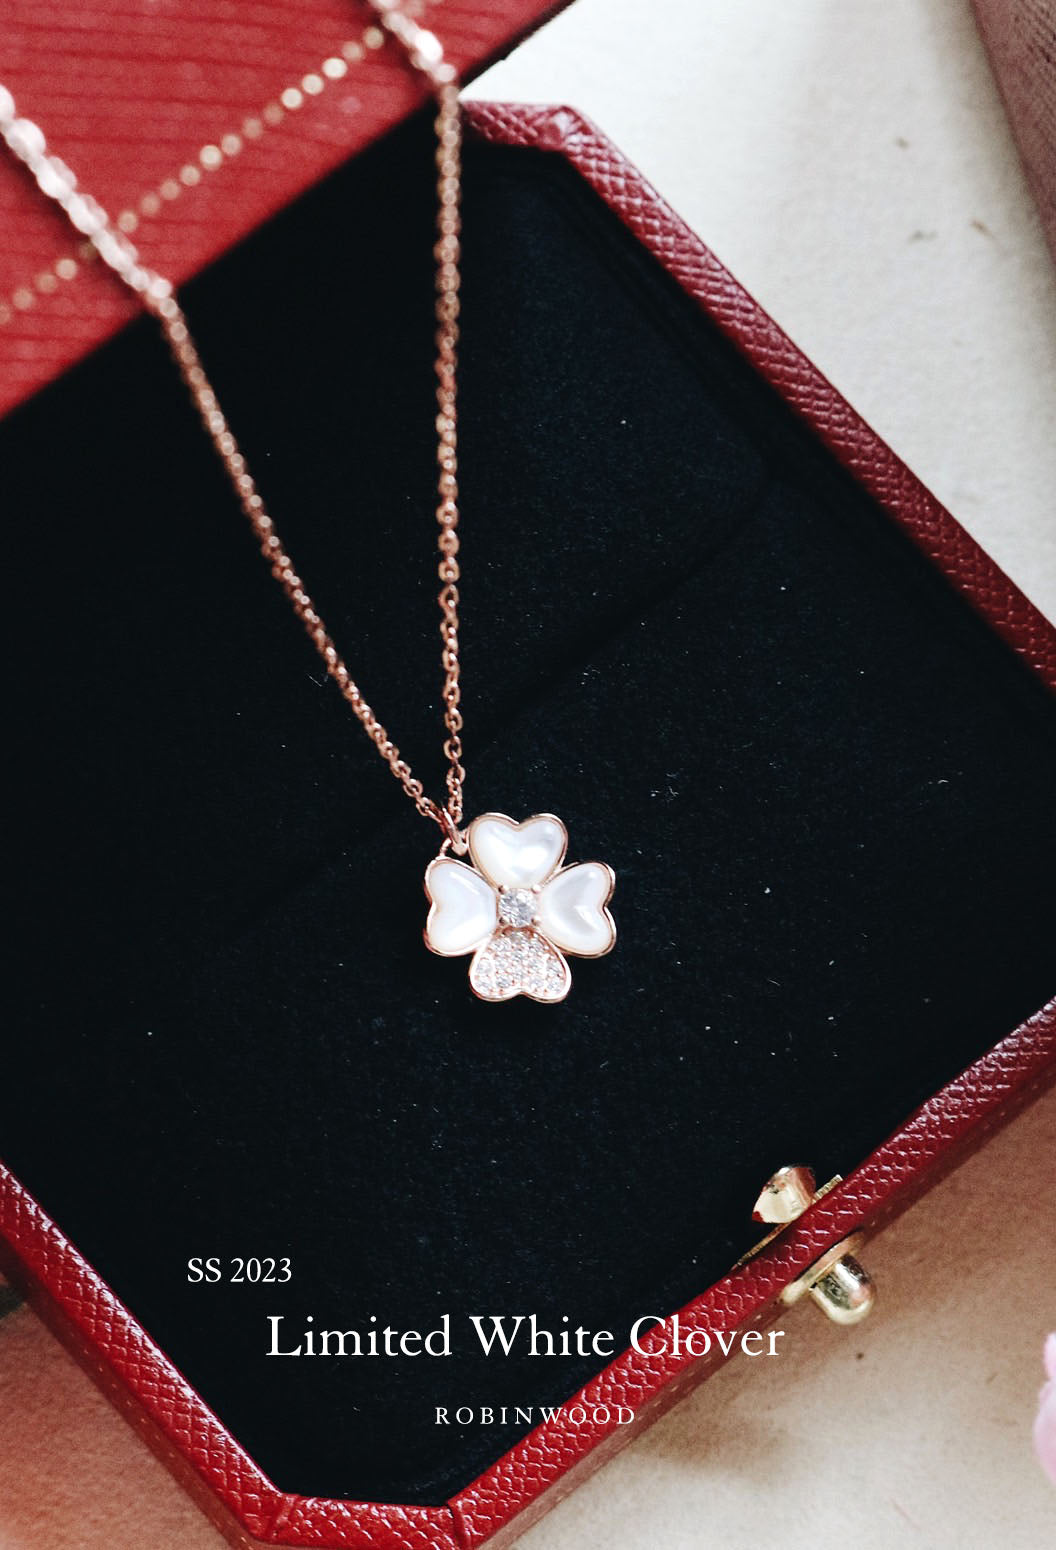 Limited Collection's " Swarovski White Clover " , Robinwood, Masterpieces Design